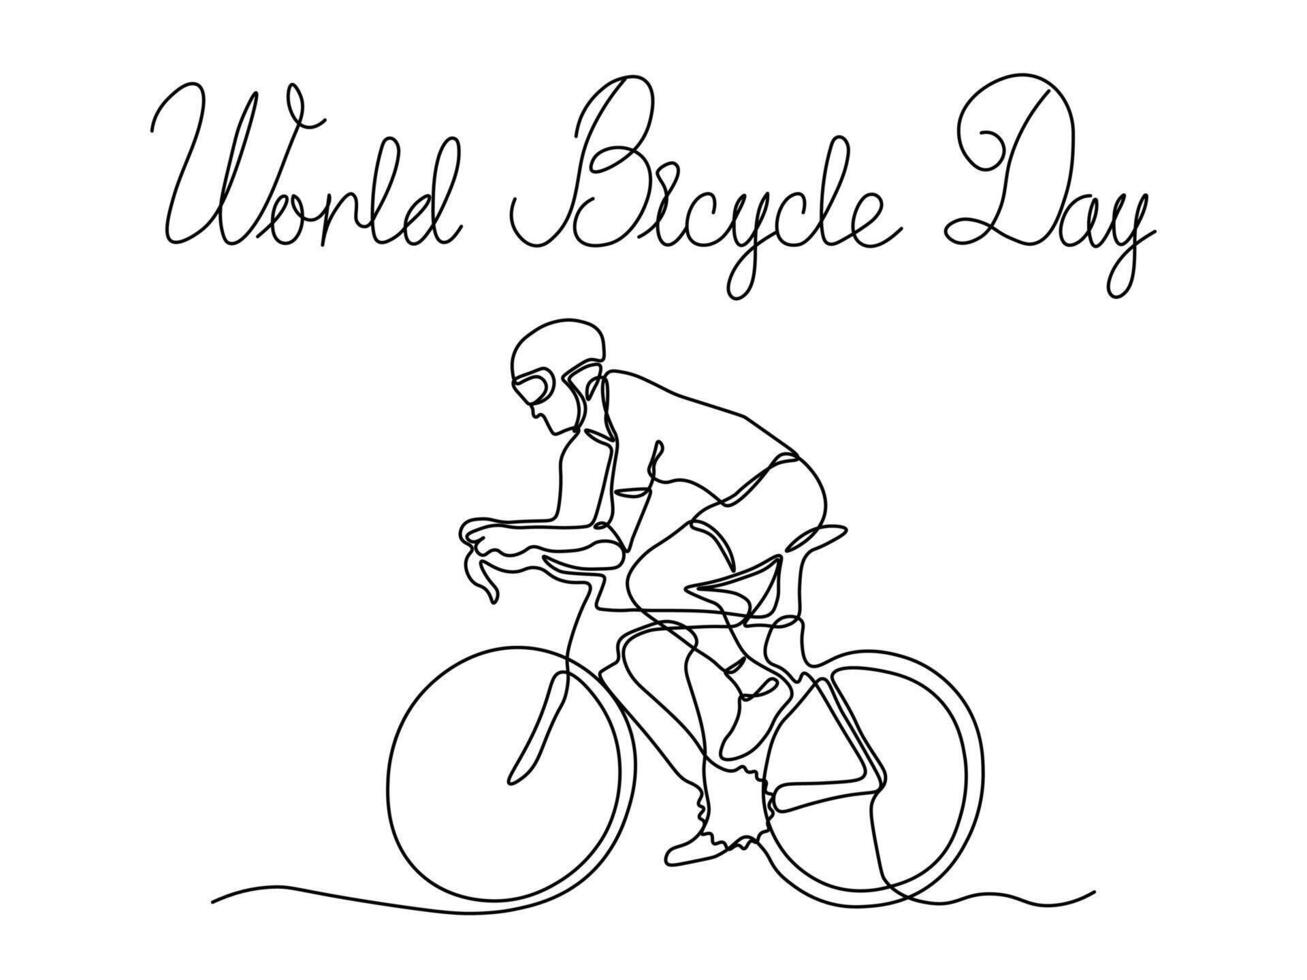 World Bicycle Day. Abstract cyclist, athlete on a bicycle,continuous one line art hand drawing sketch vector